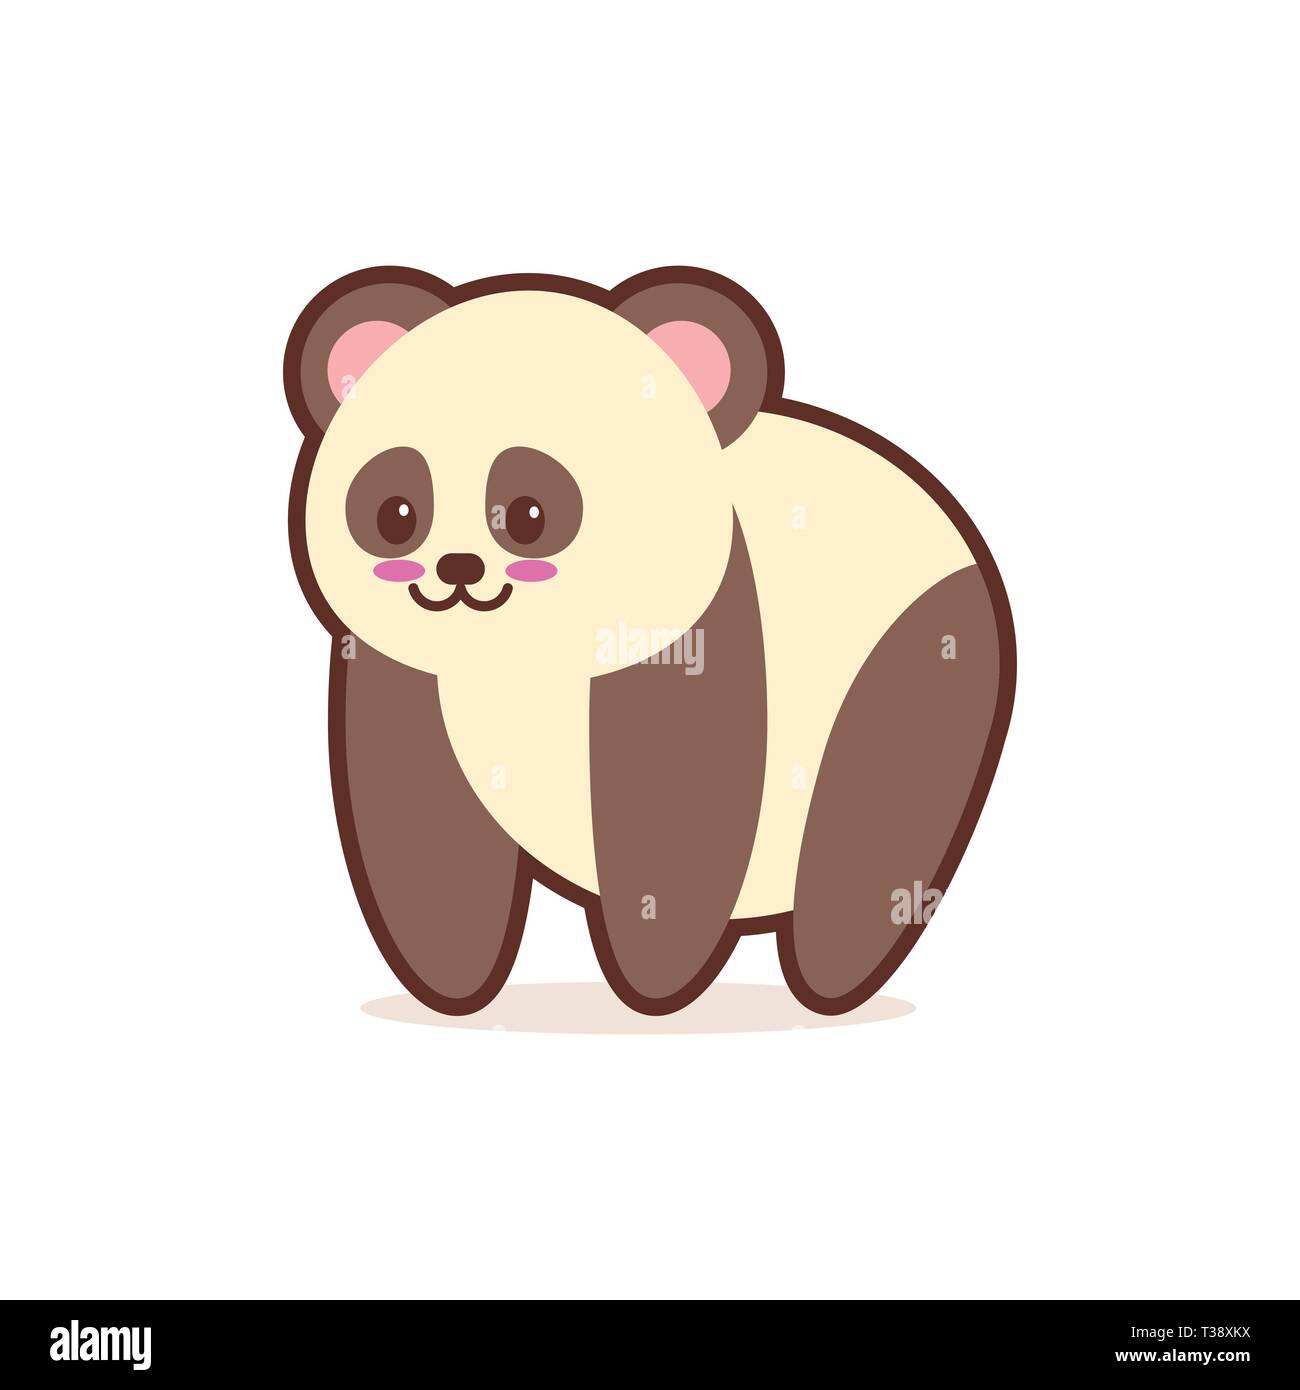 cute panda cartoon comic character with smiling face happy emoji anime kawaii style funny animals for kids concept vector illustration Stock Vector